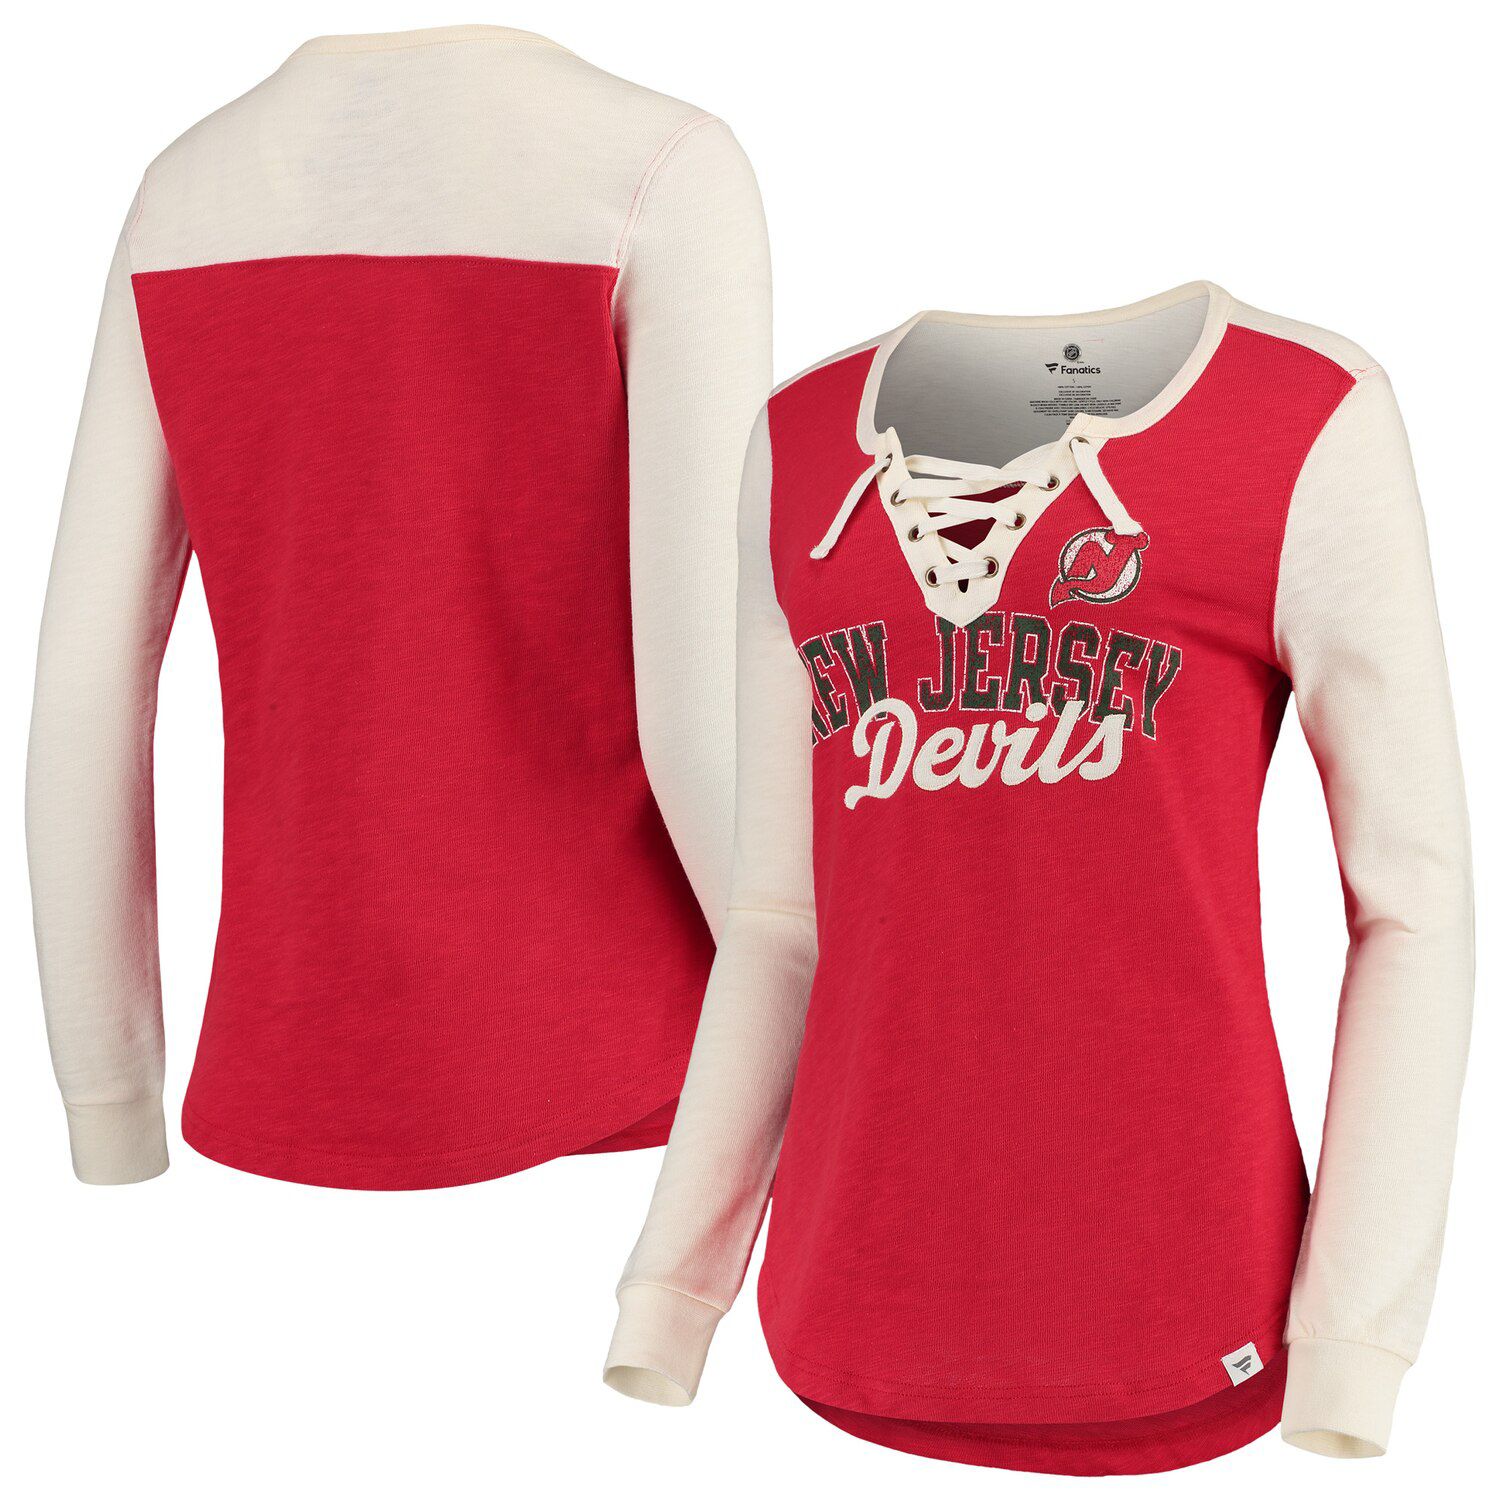 new jersey devils classic jersey